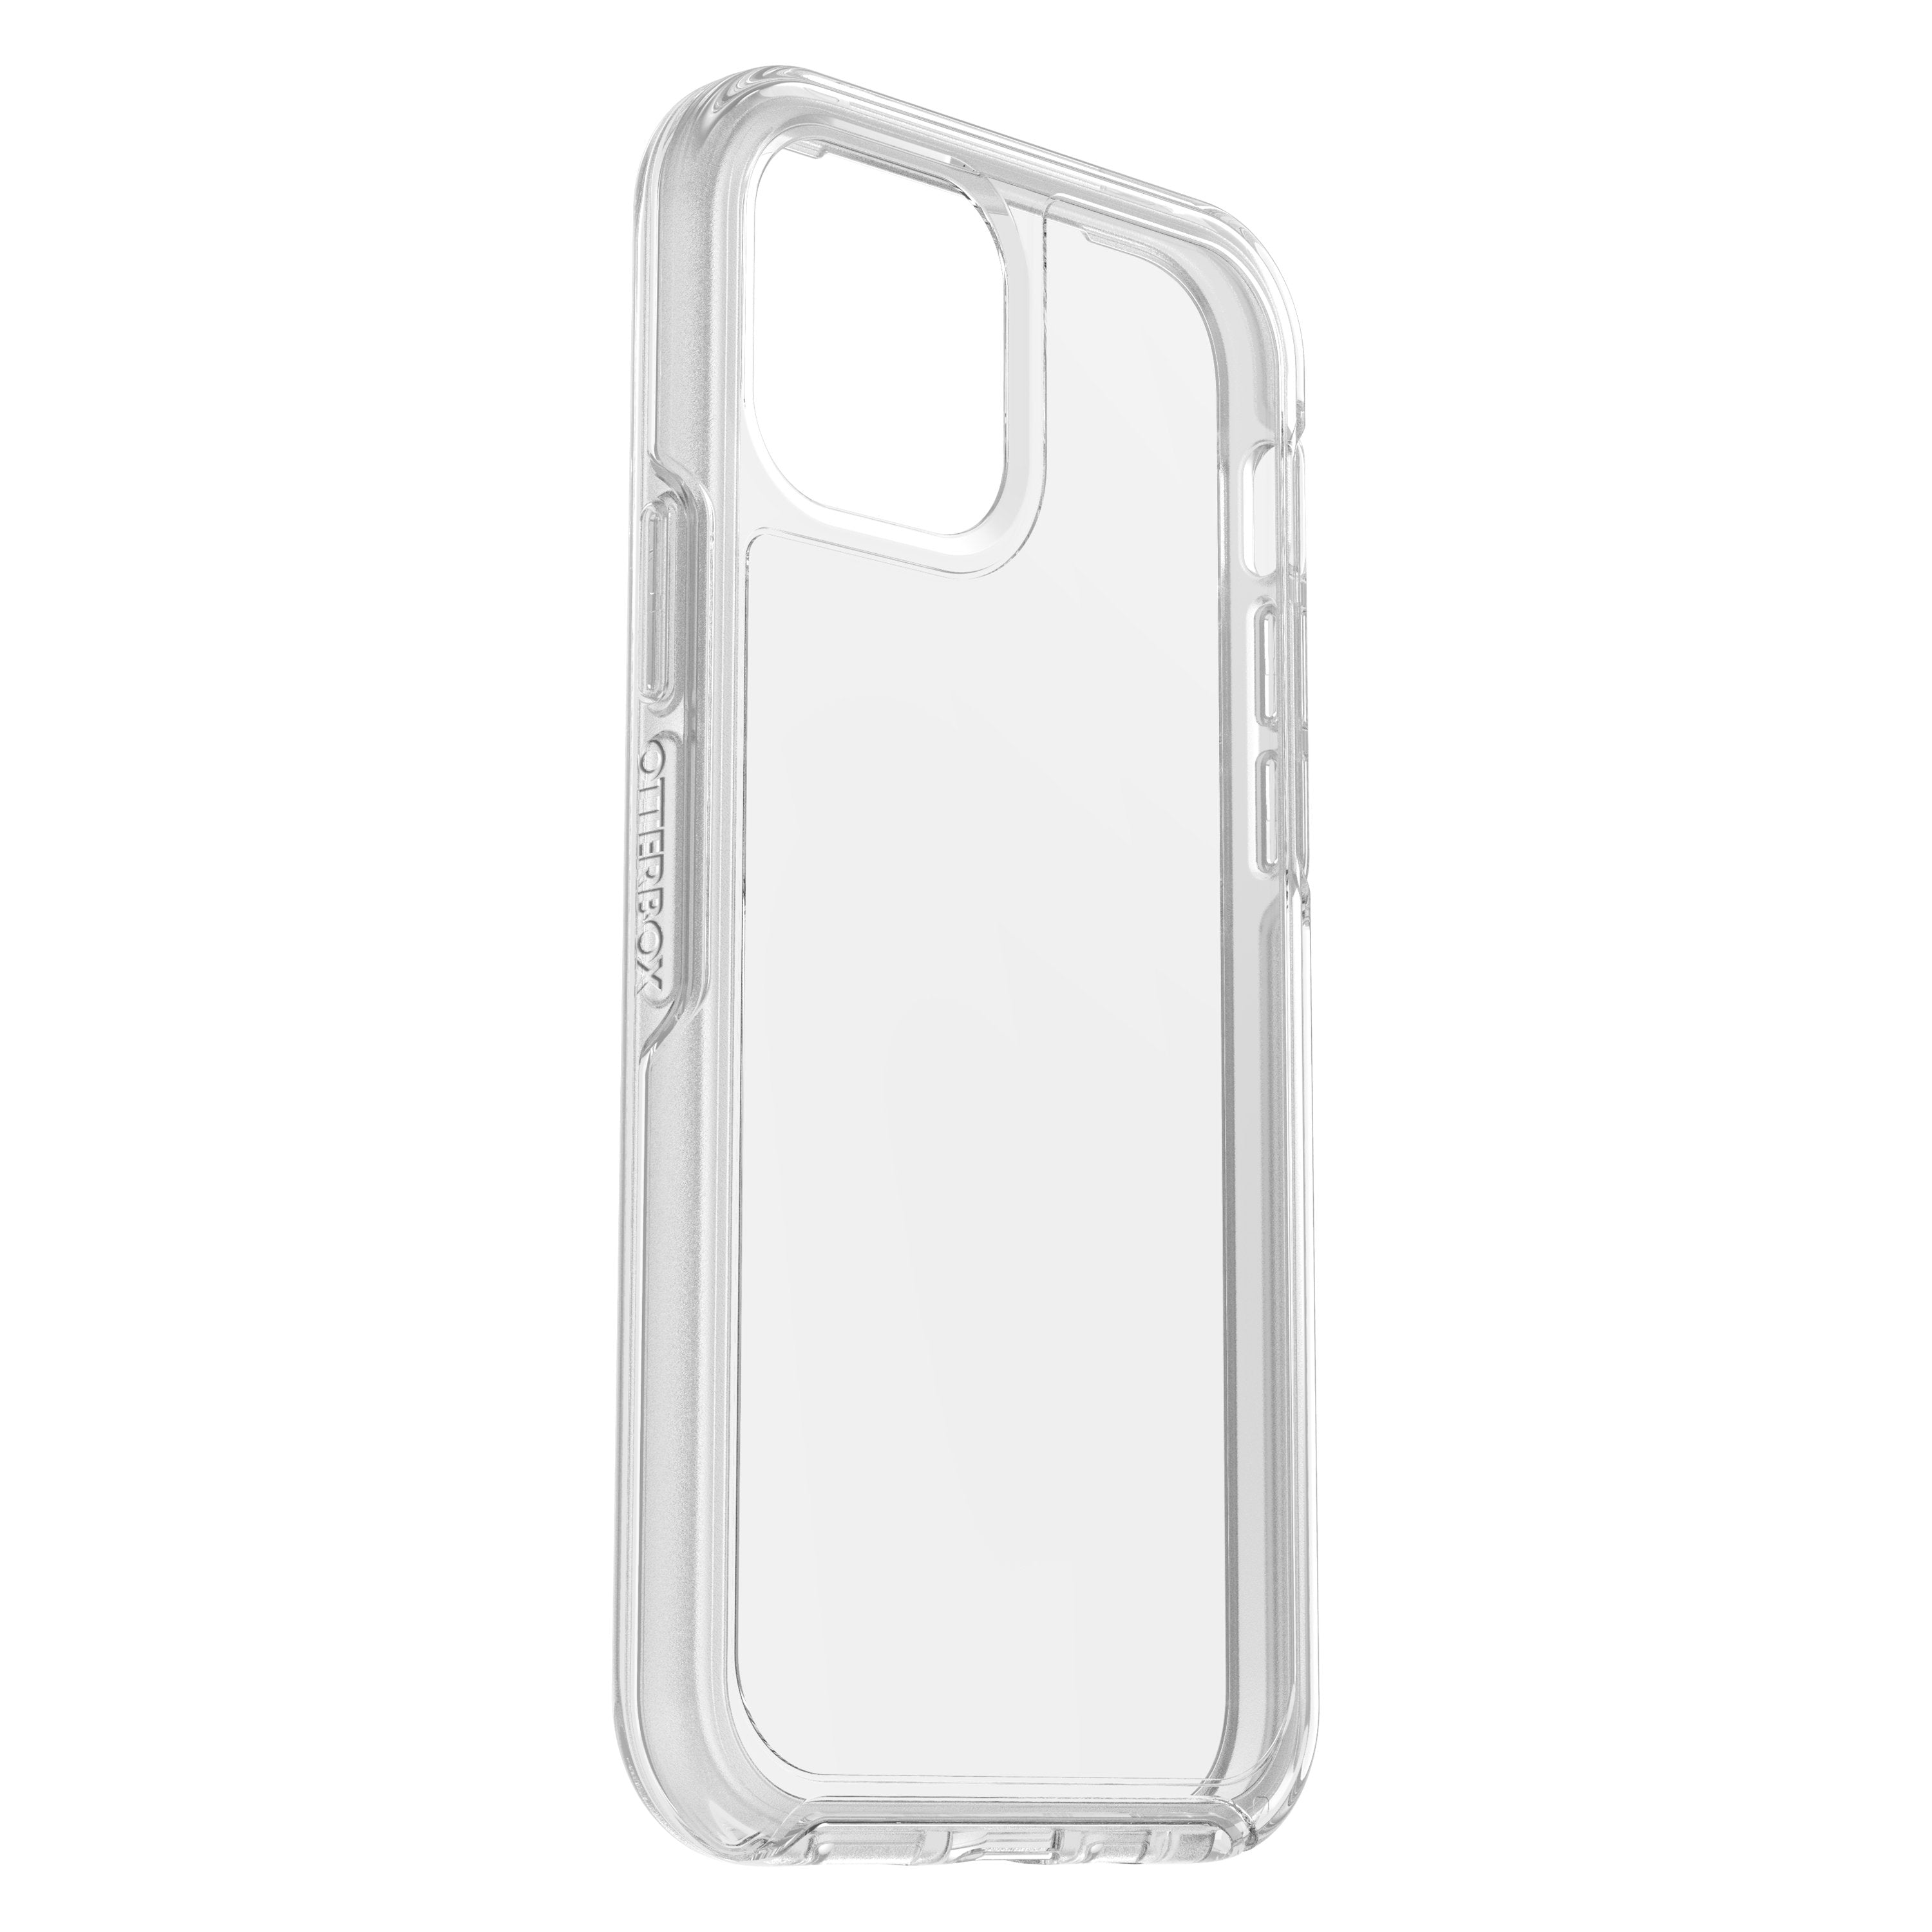 OtterBox Apple iPhone 12 / 12 Pro SYMMETRY Clear case - Slim and Lightweight Cover w/ Military Grade Drop Protection, Wireless Charging Compatible - Clear